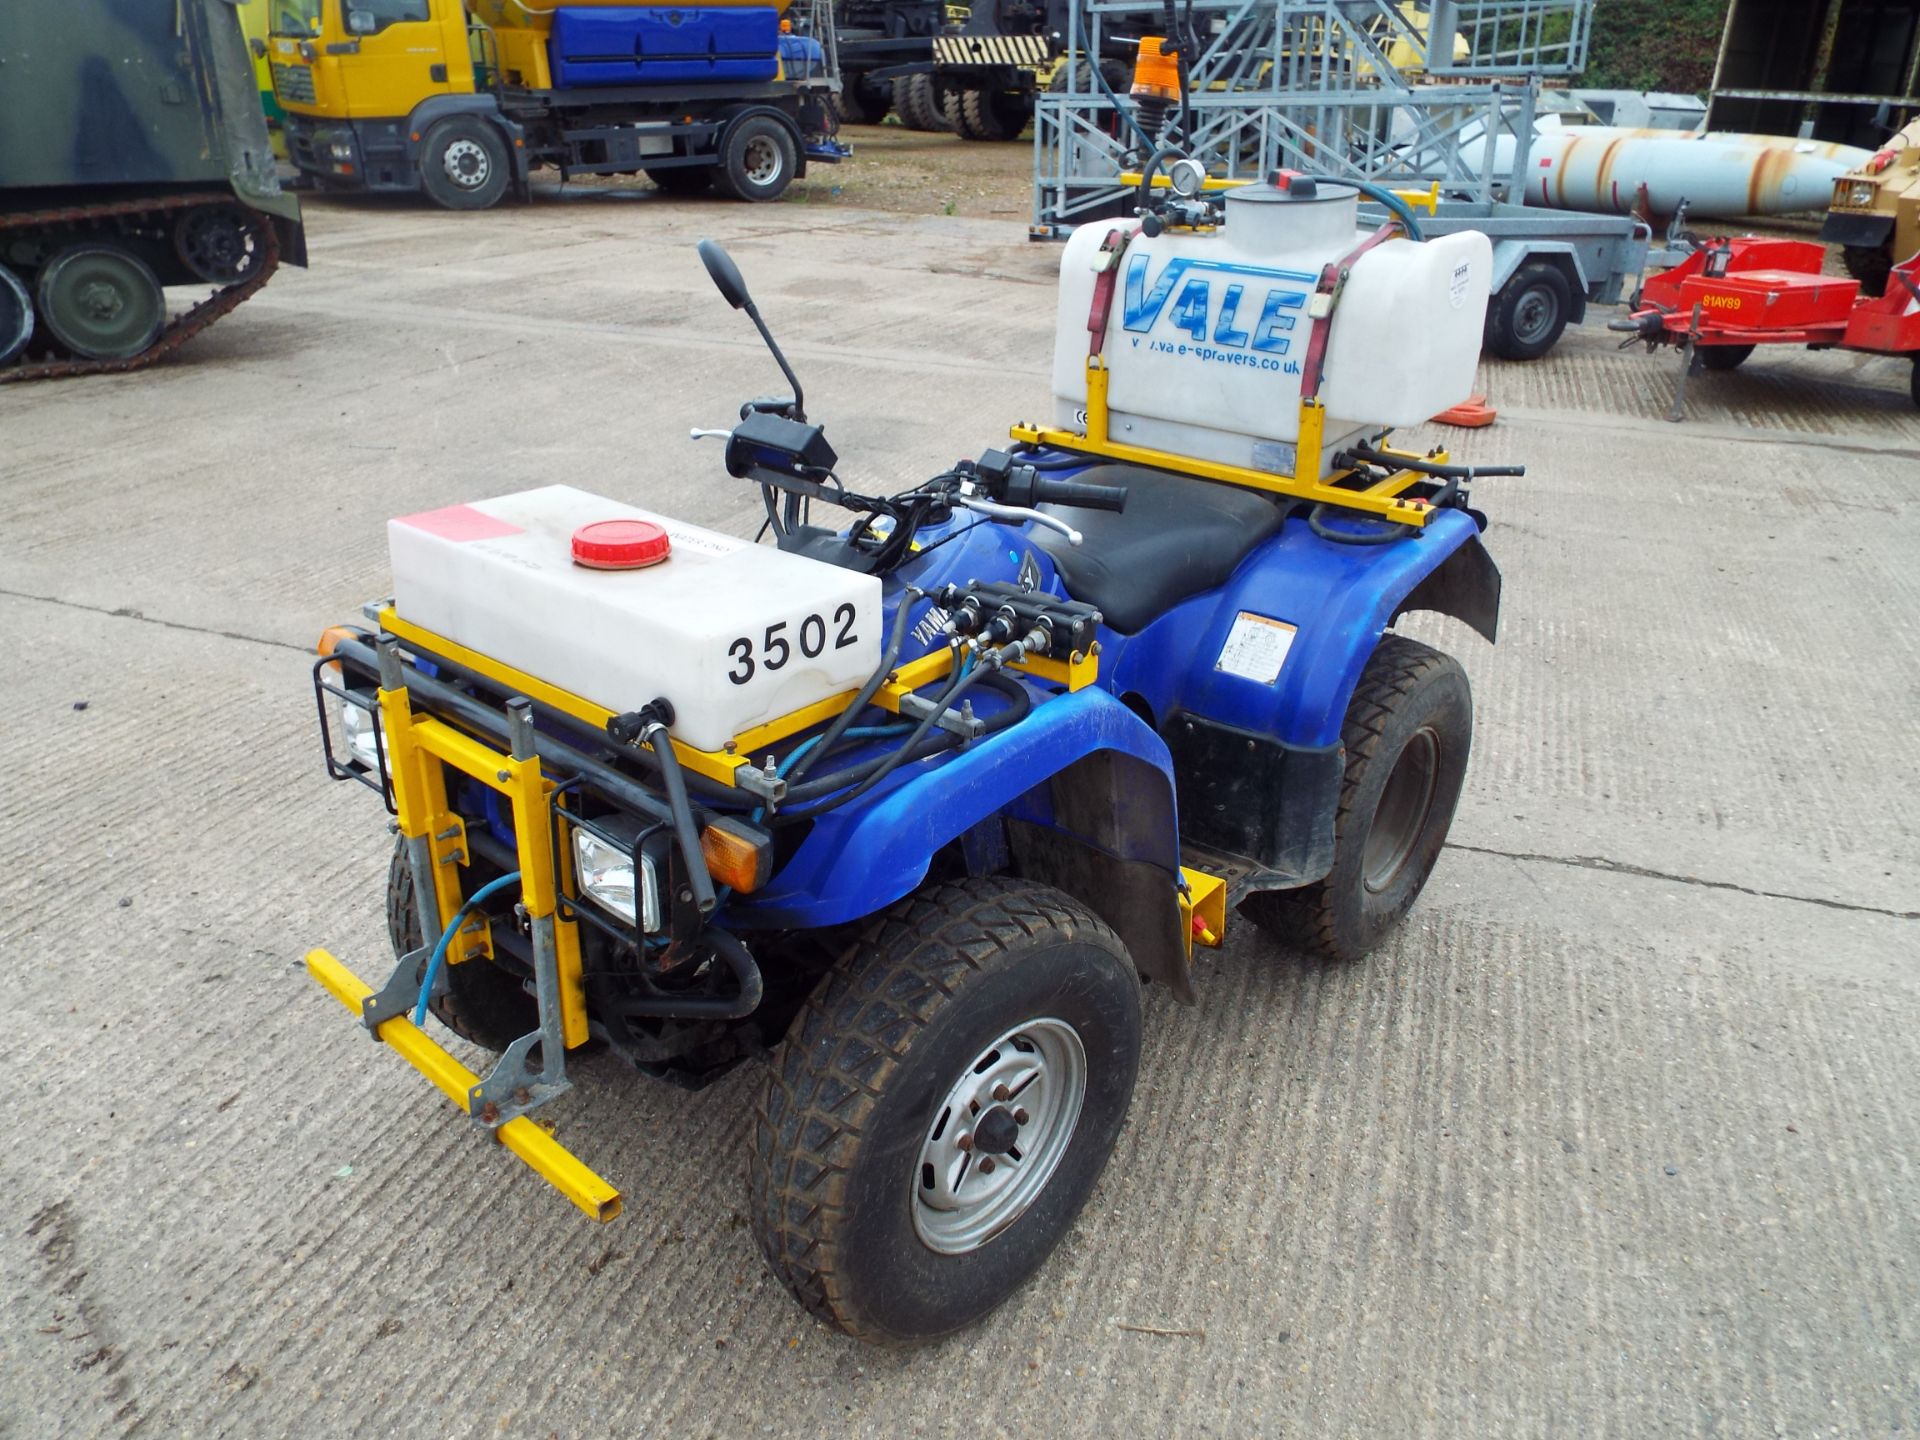 2008 Yamaha Grizzly 350 Ultramatic Quad Bike fitted with Vale Front/Rear Spraying Equipment - Image 3 of 26